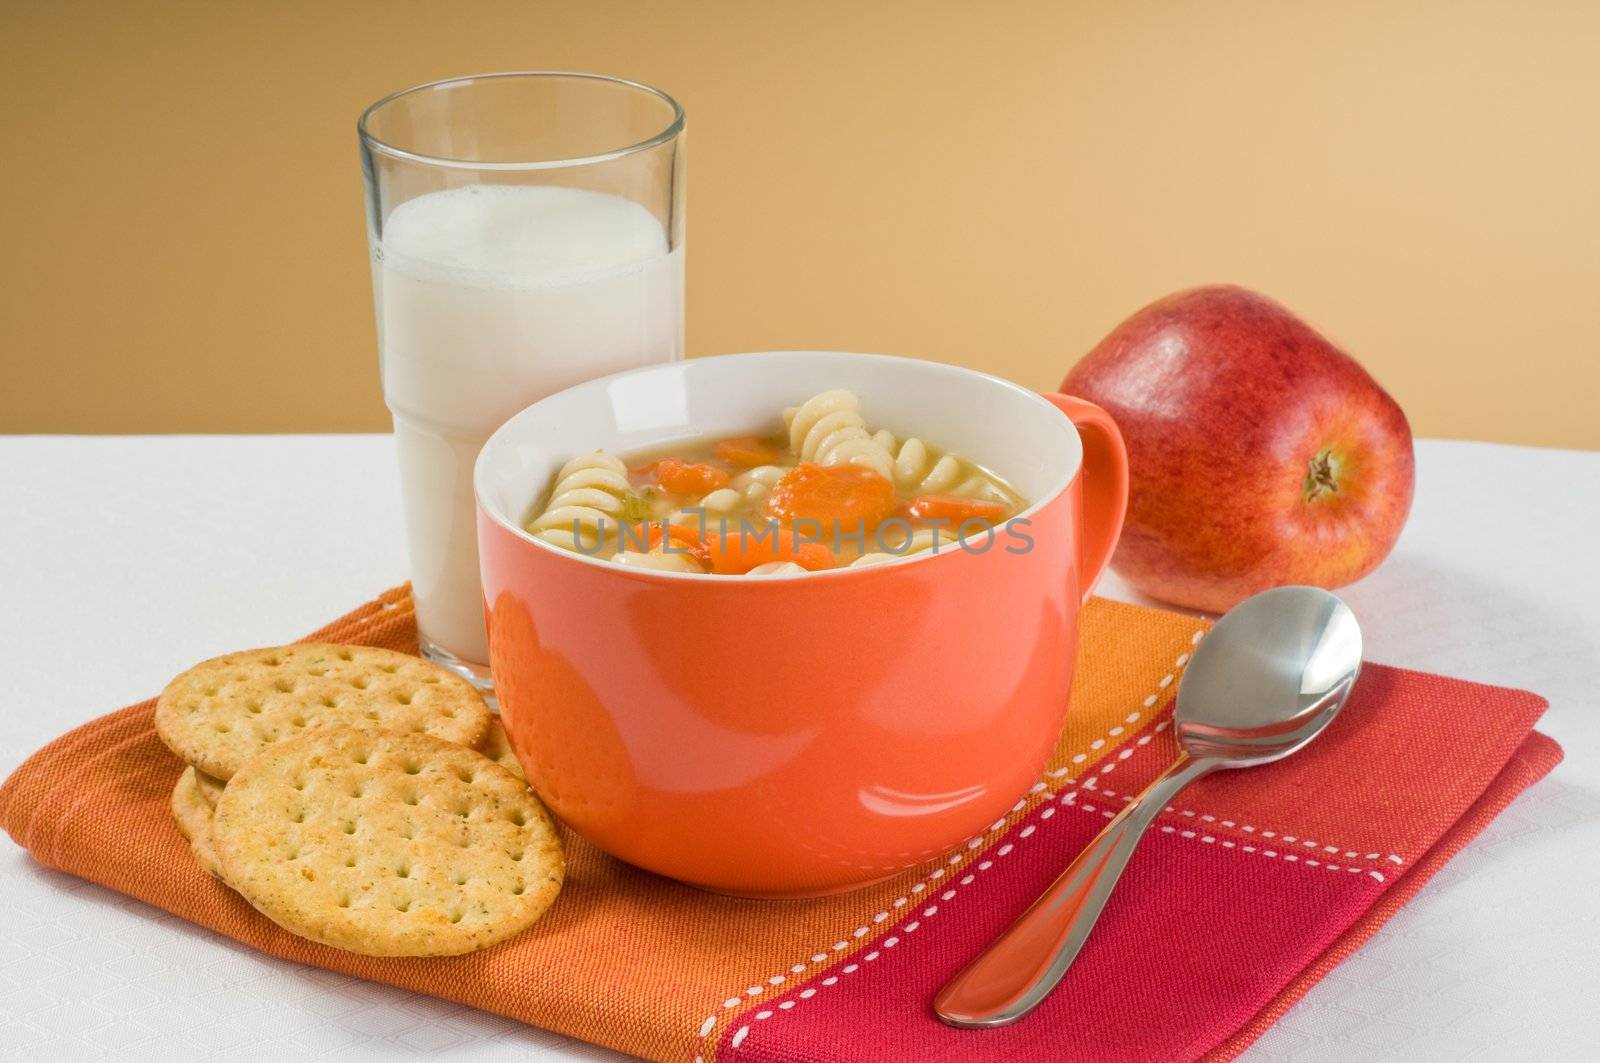 Healthy lunch of soup, crackers, apple and milk.